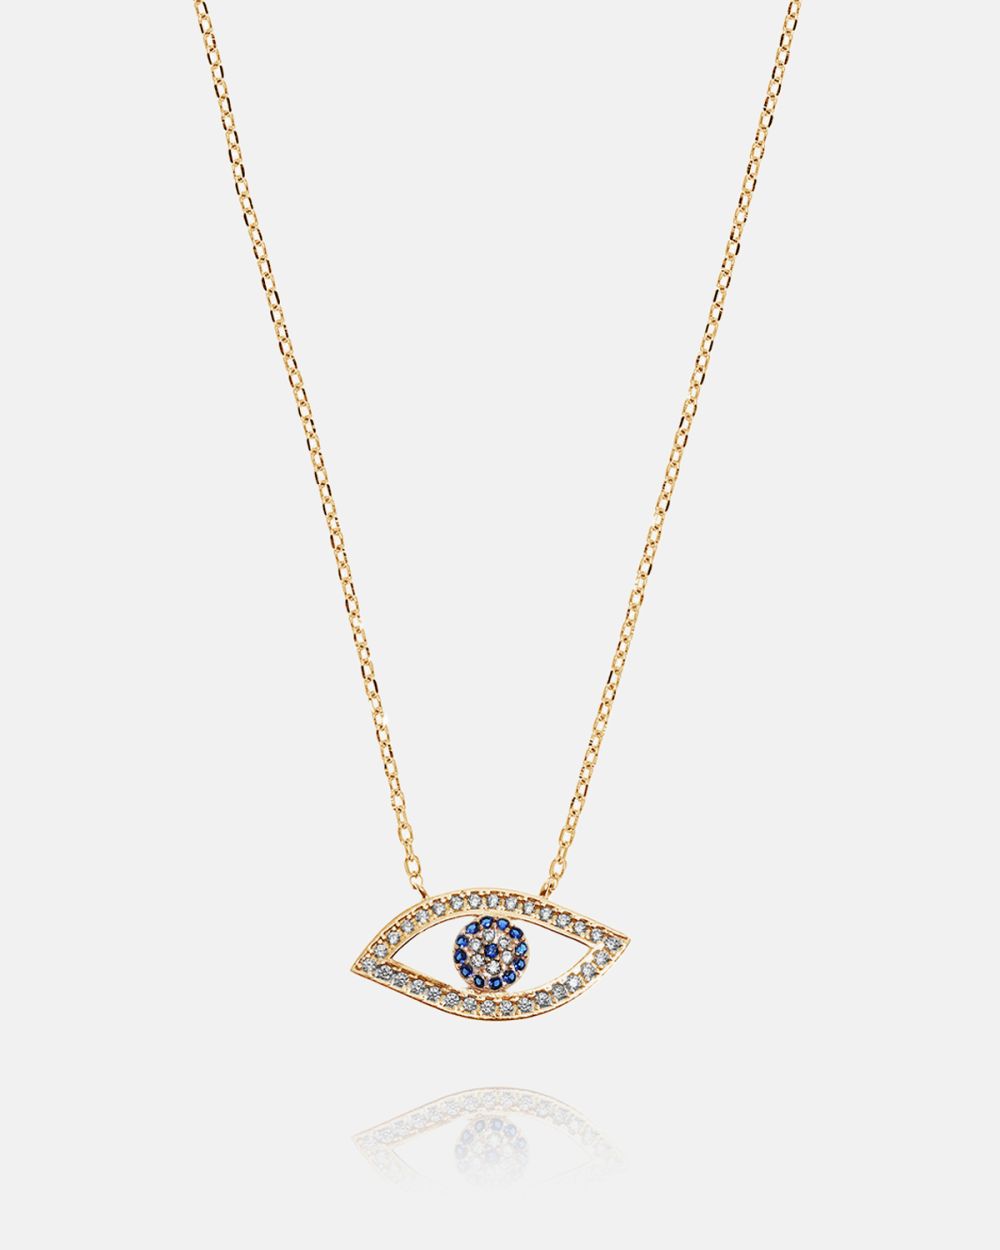 Blue Mystic Eye Necklace in Gold-Plated Silver